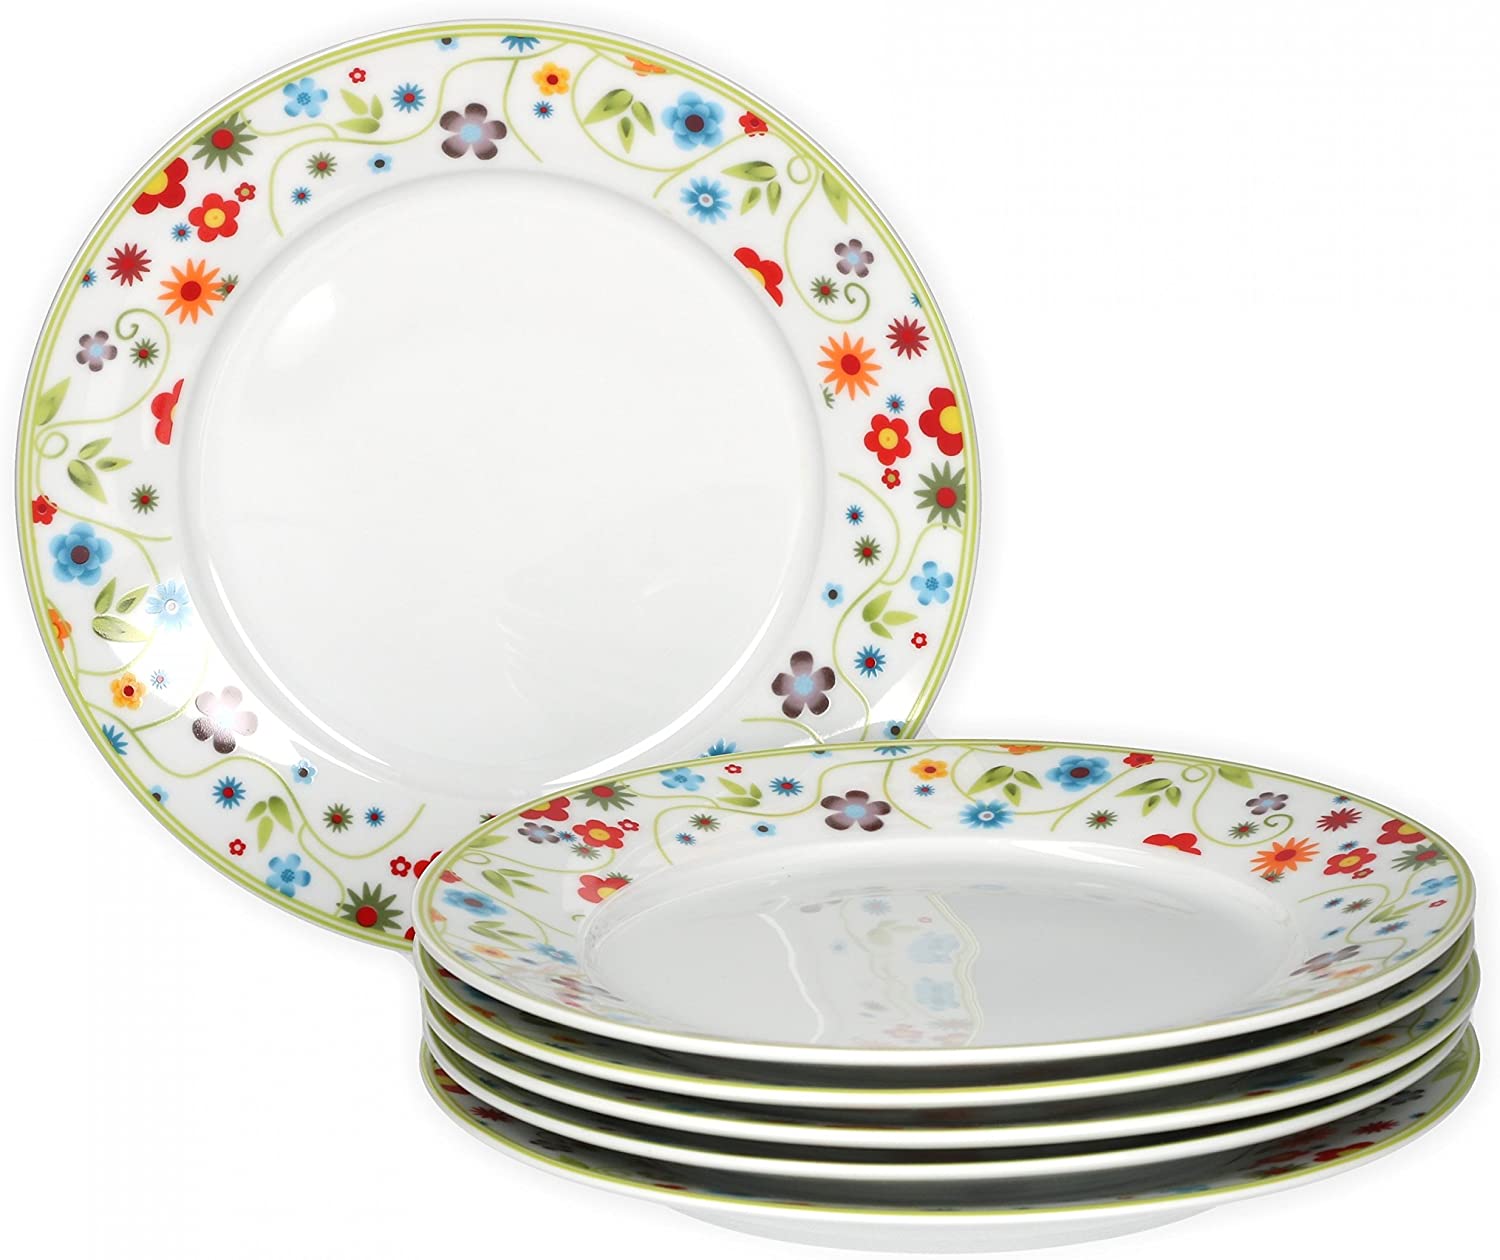 Van Well Vario Breakfast Plate Set 6 Pieces I Plate Service for 6 People I Cake Plate with Diameter 20 cm I Porcelain Set White with Flower Design I Dessert Plate Set Microwave Safe